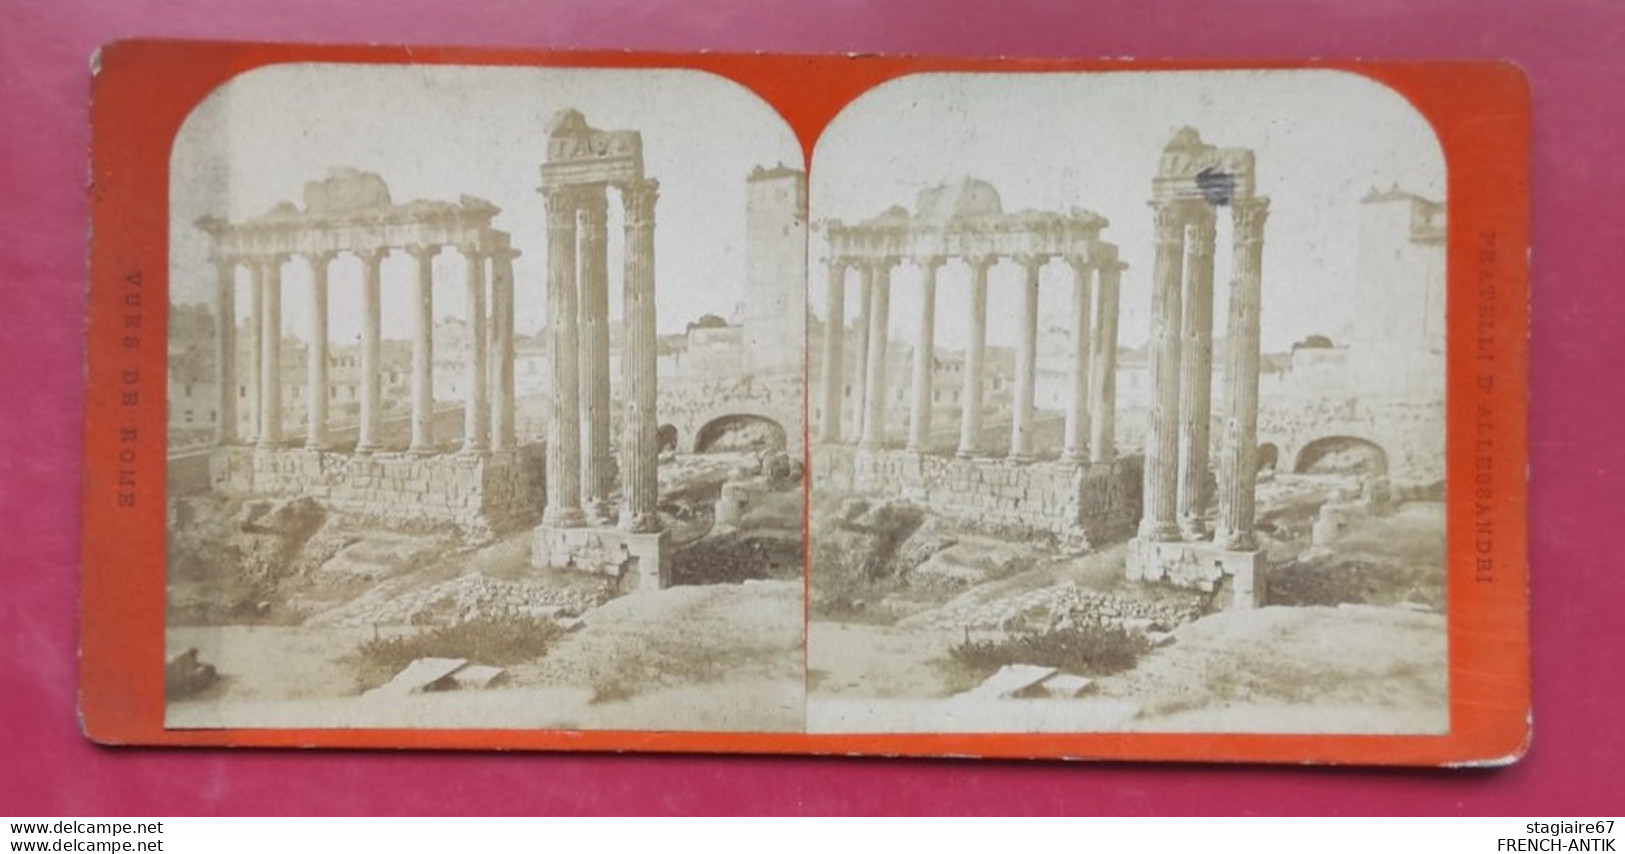 PHOTO STEREO LIBAN? A IDENTIFIER ? - Stereo-Photographie